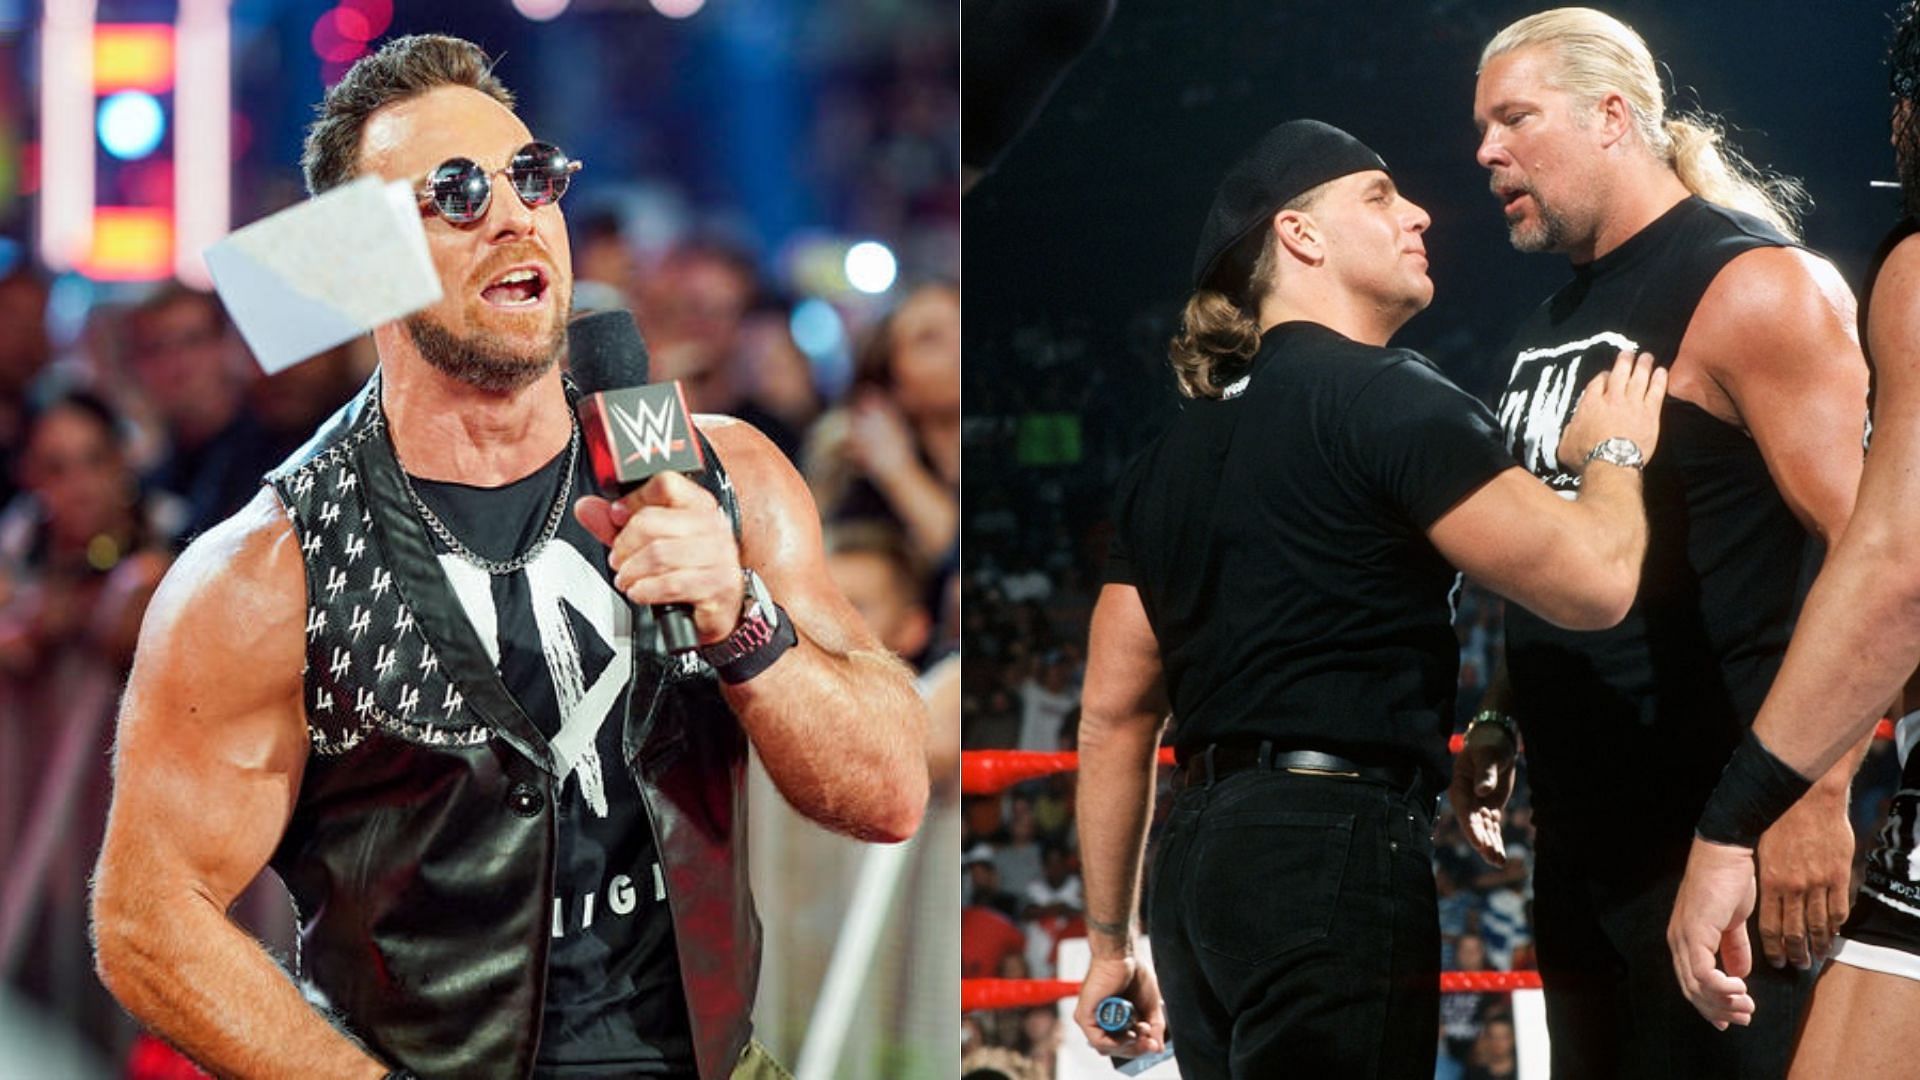 LA Knight (left); Shawn Michaels and Kevin Nash (right)